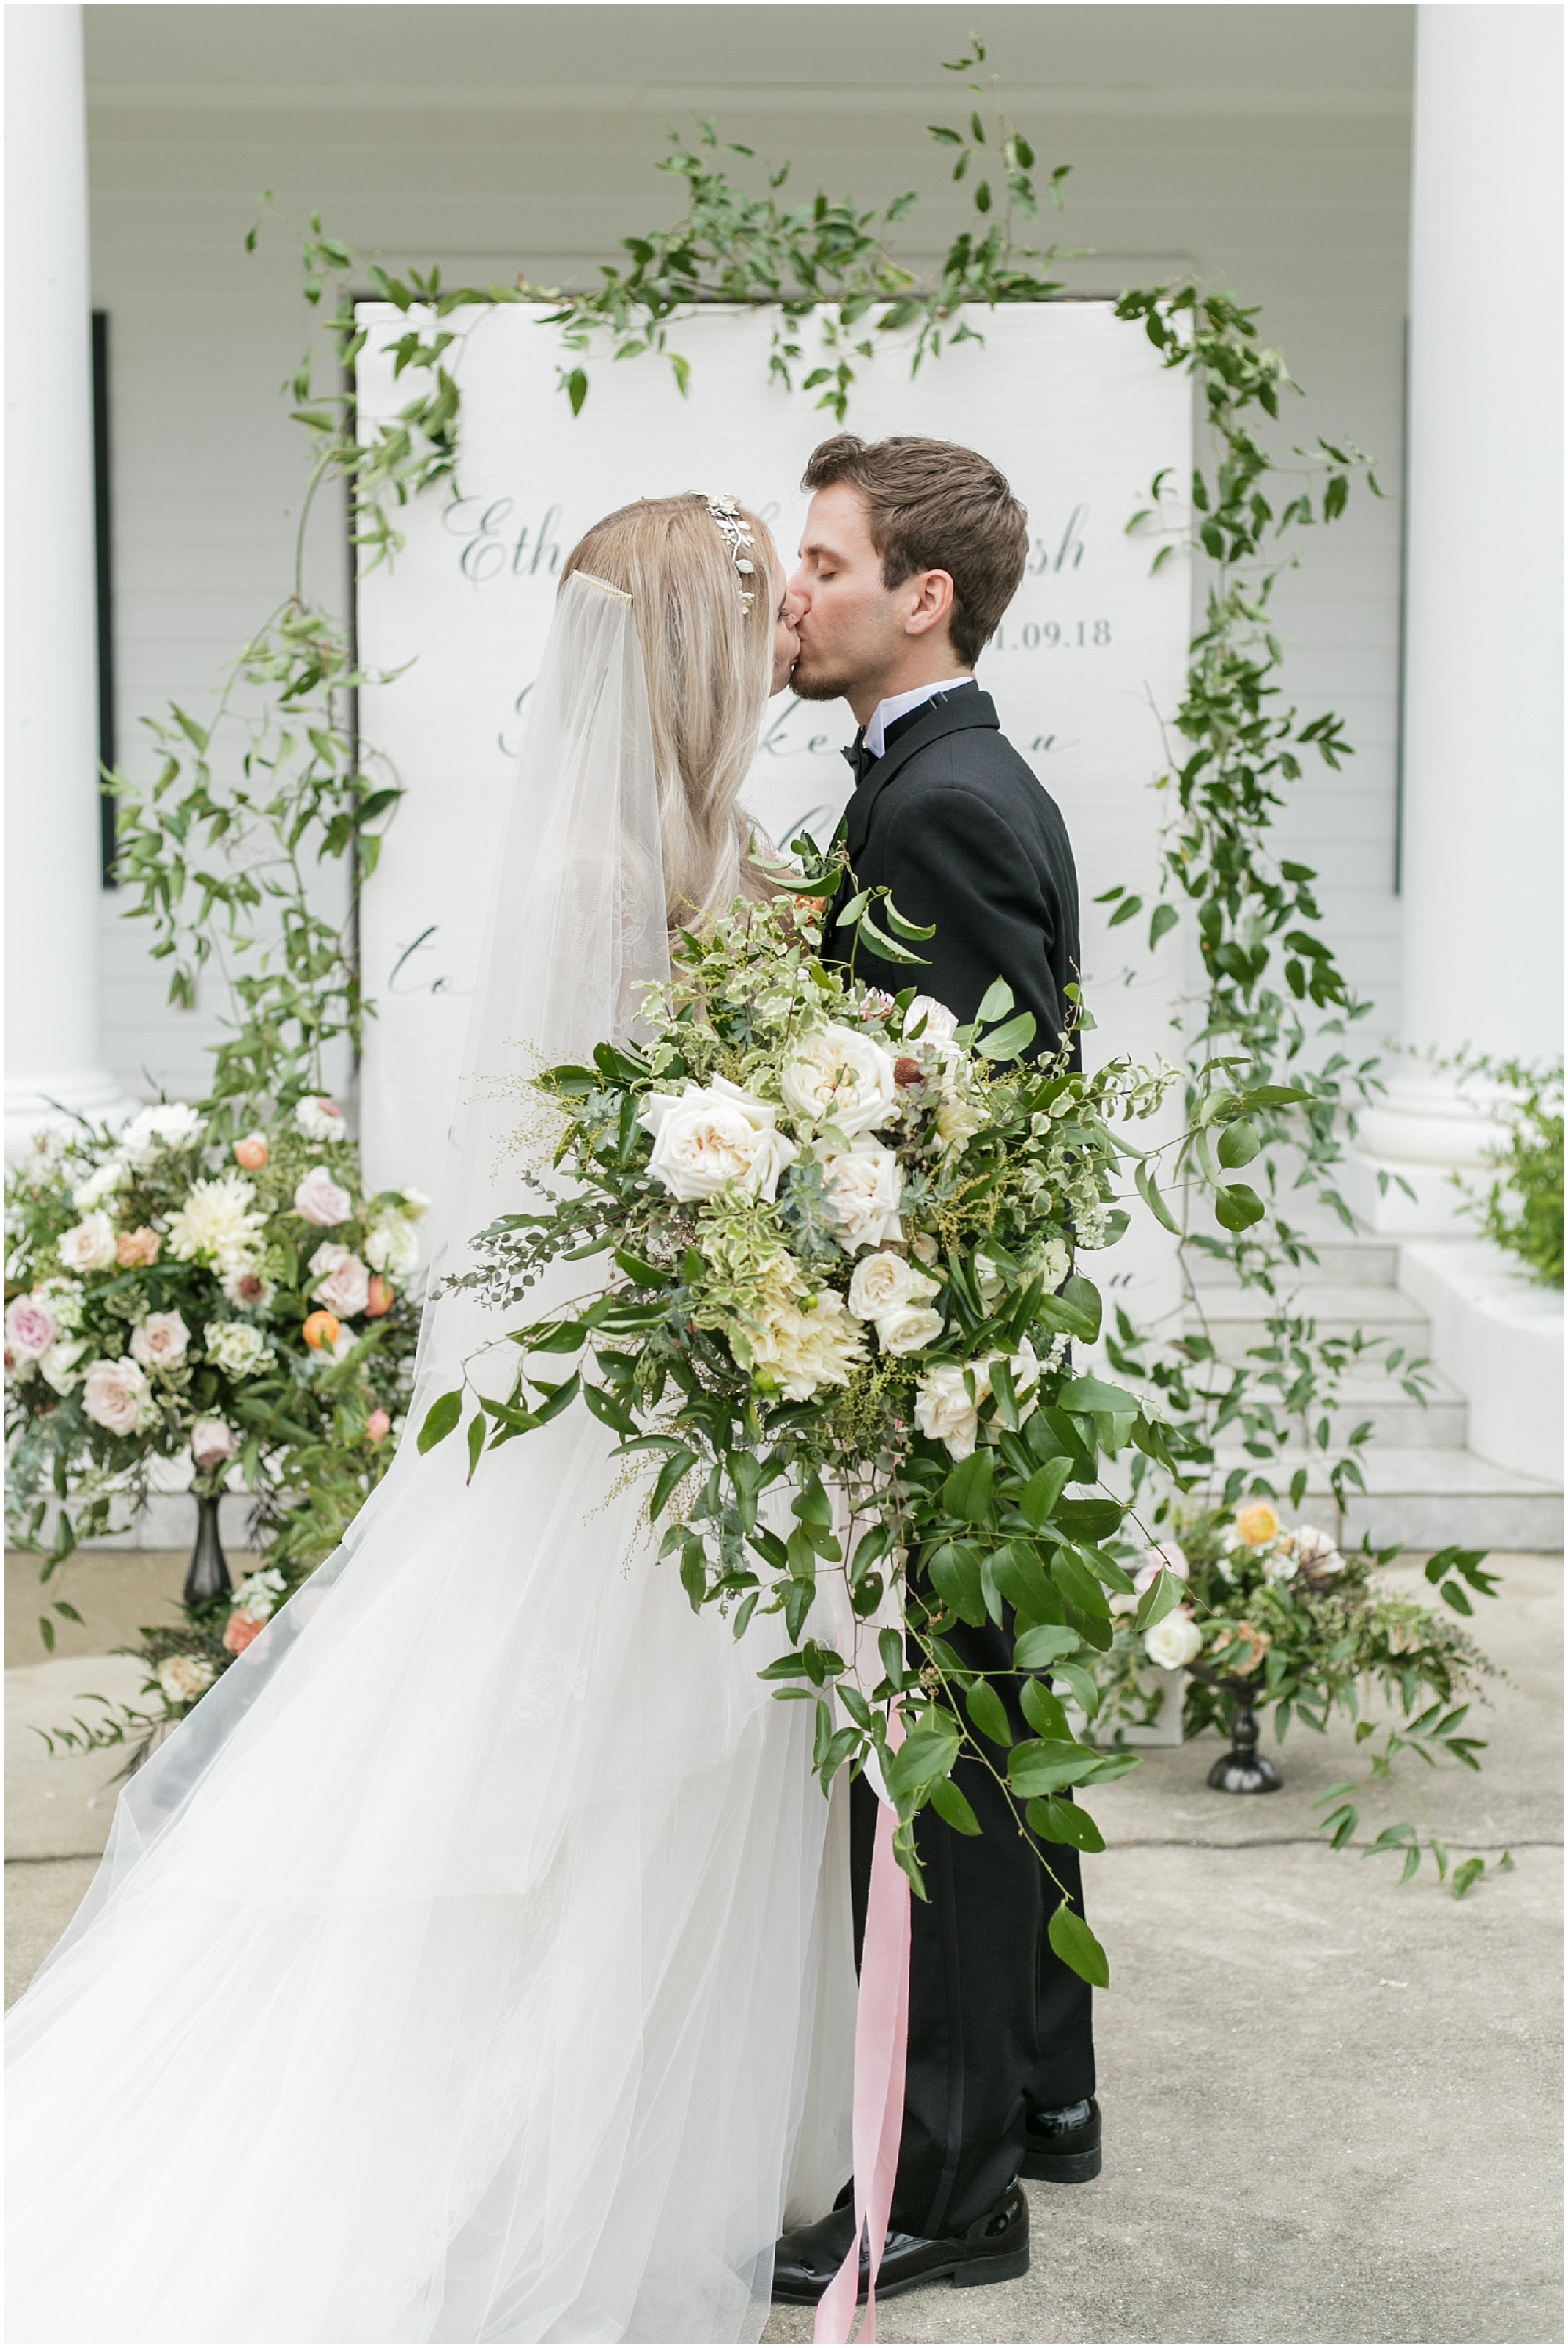 Timeless Southern Wedding bride and groom kiss for the first time as a married couple.